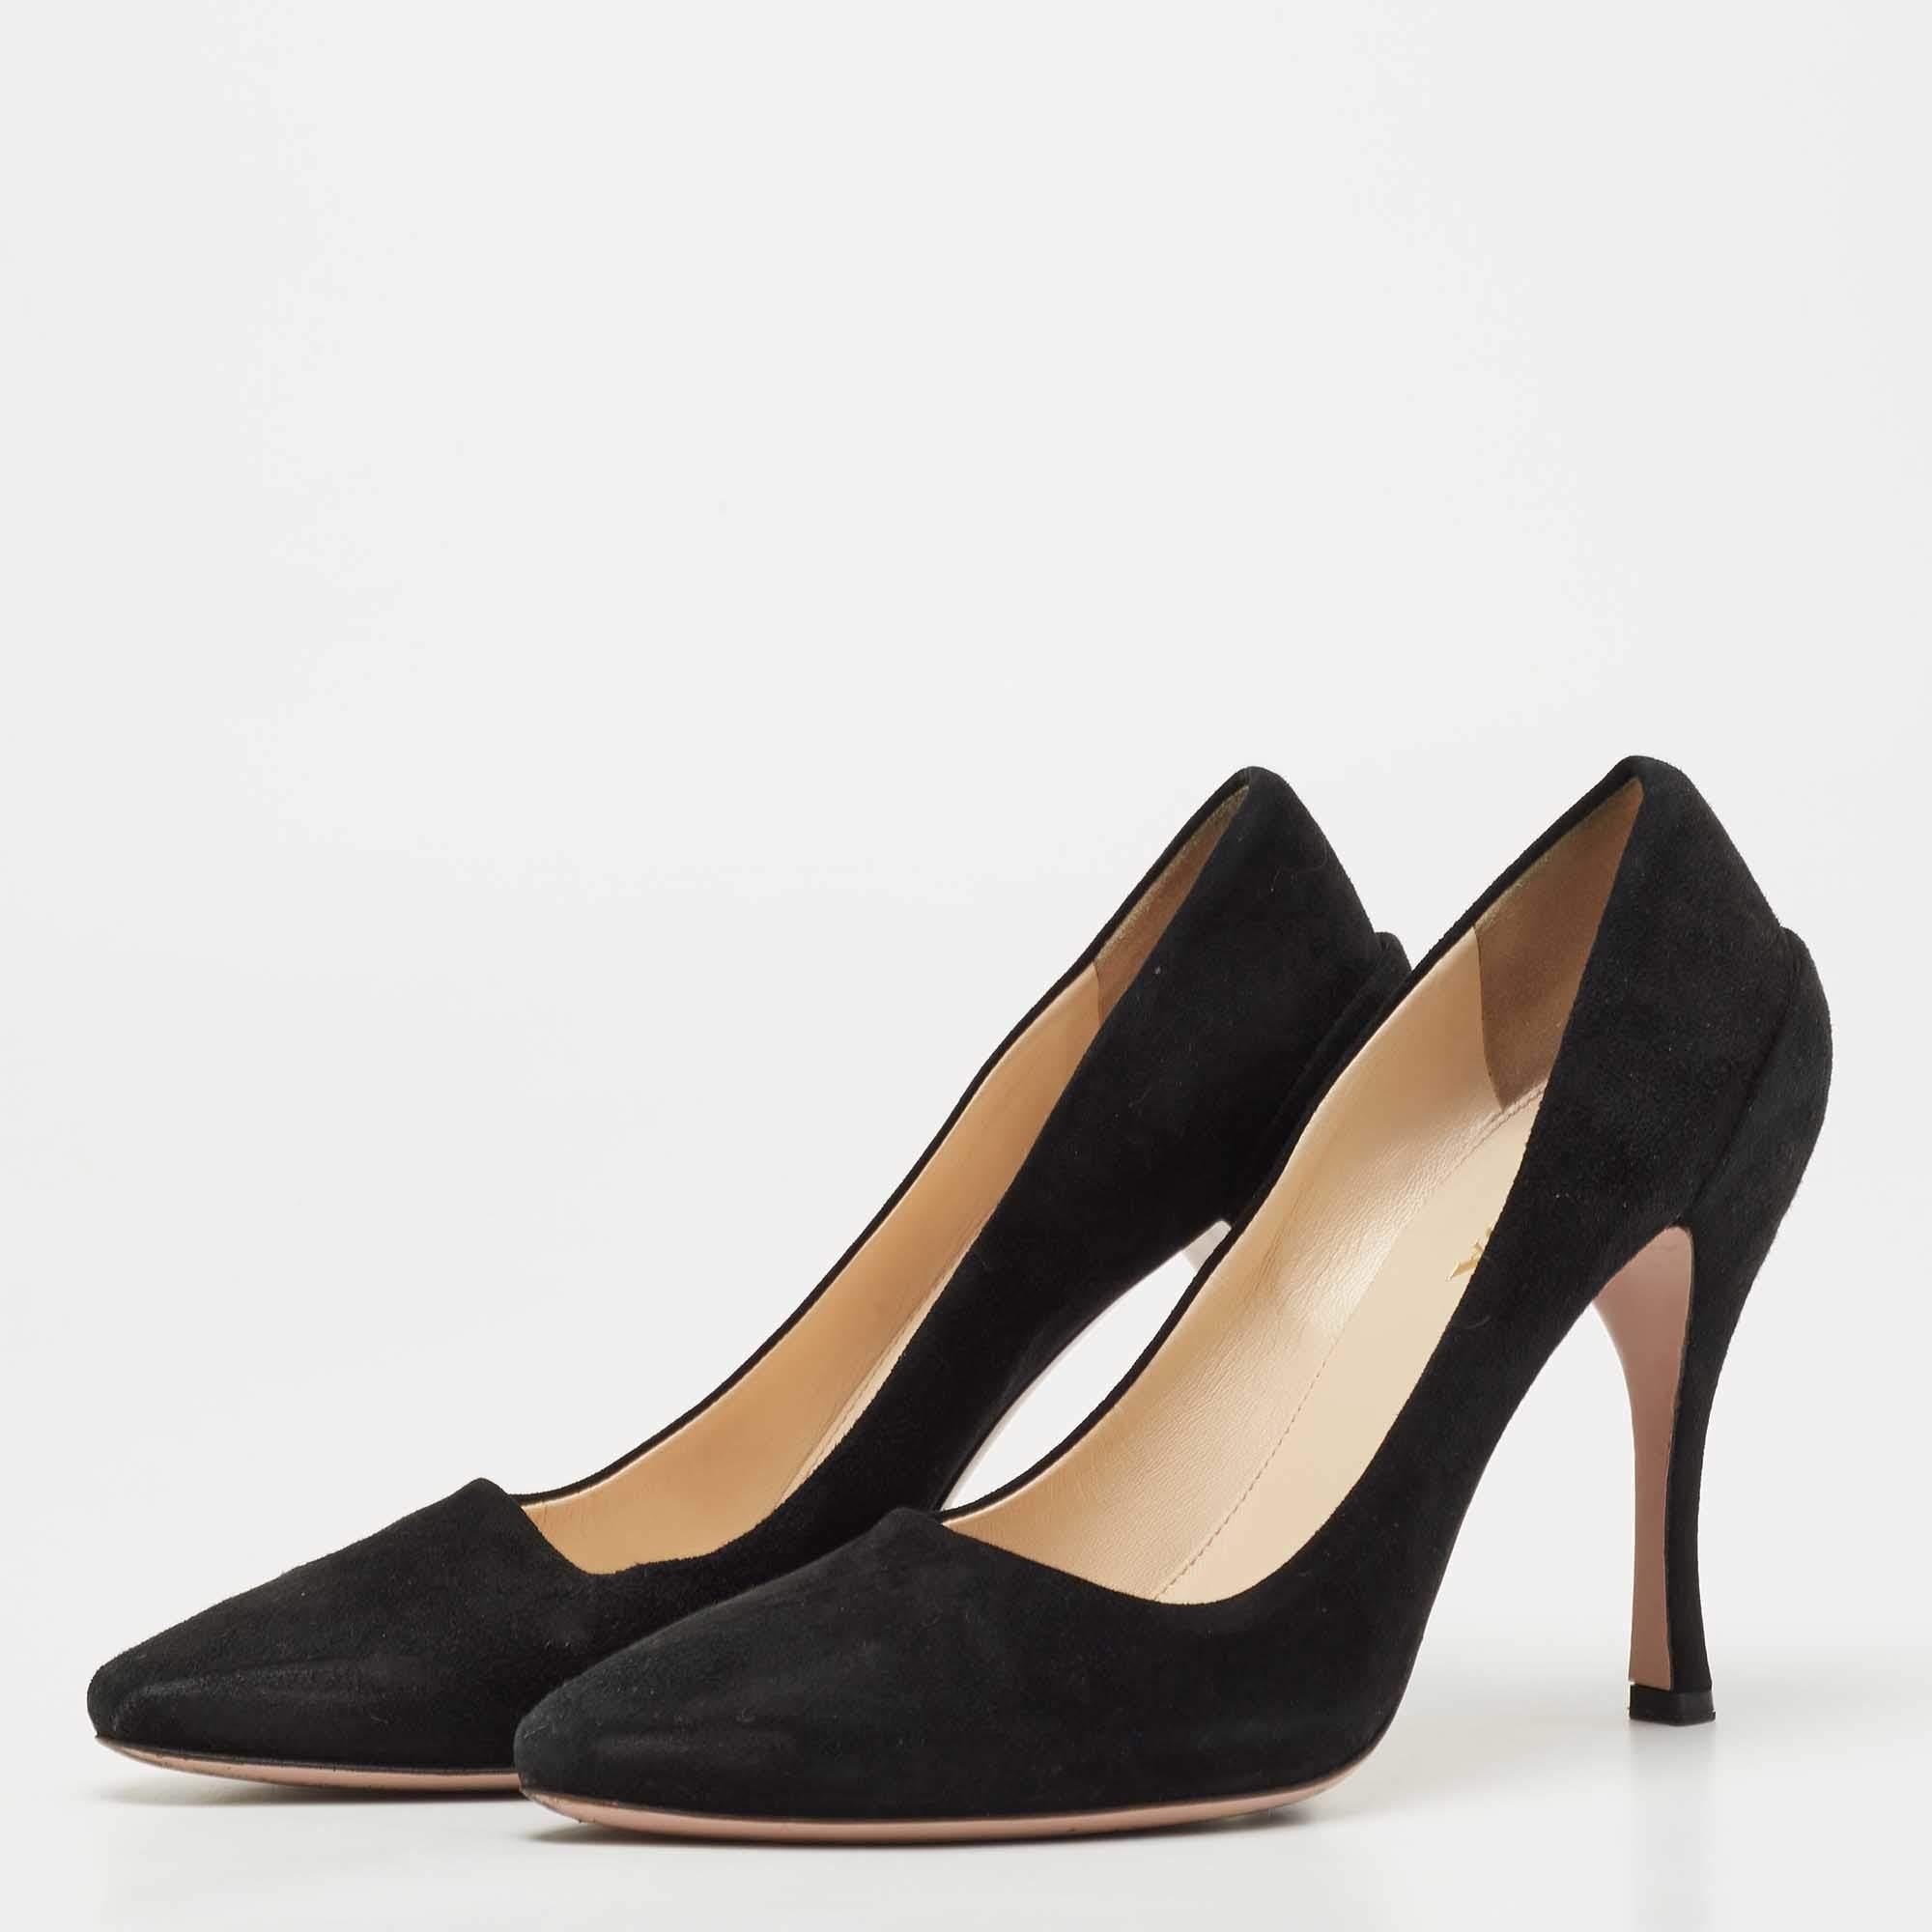 Exhibit an elegant style with this pair of pumps. These elegant shoes are crafted from quality materials. They are set on durable soles and sleek heels.

Includes: Original Box